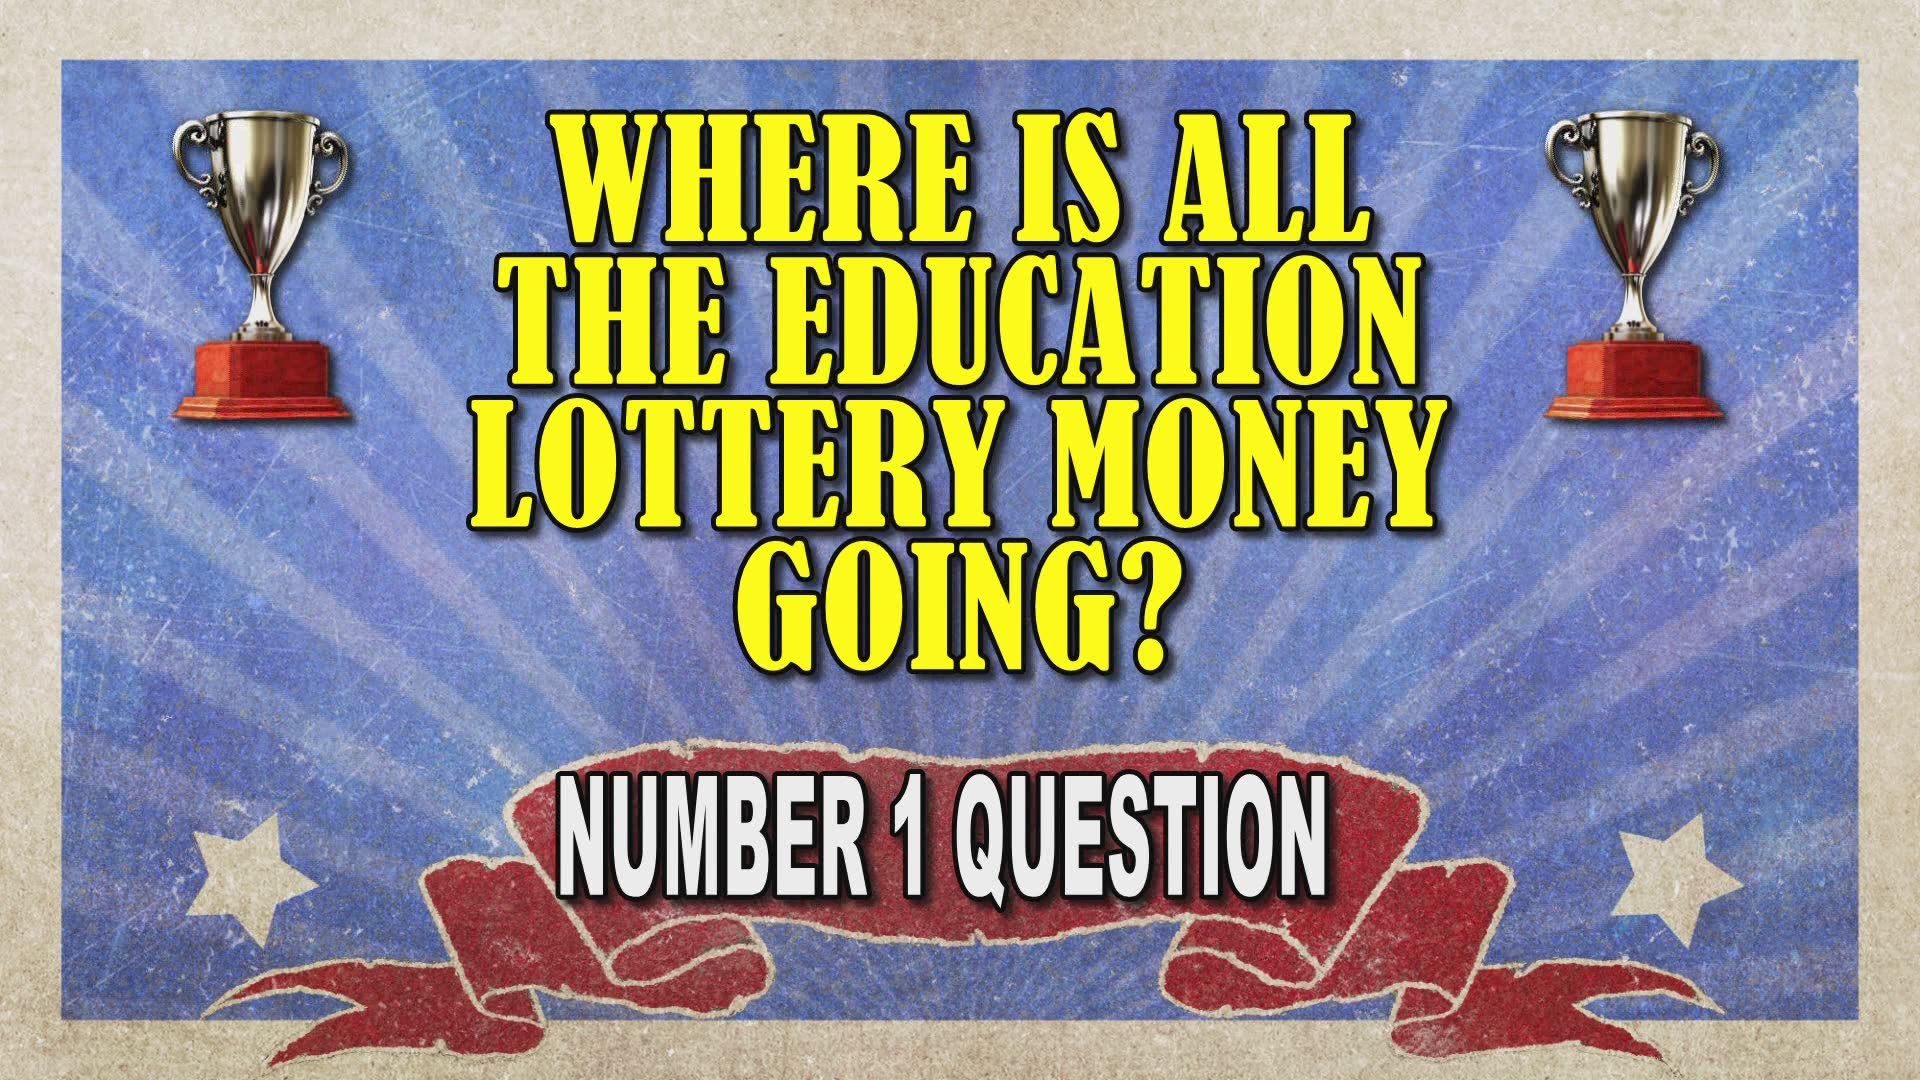 It's call the NC Education Lottery and here's how it breaks down.